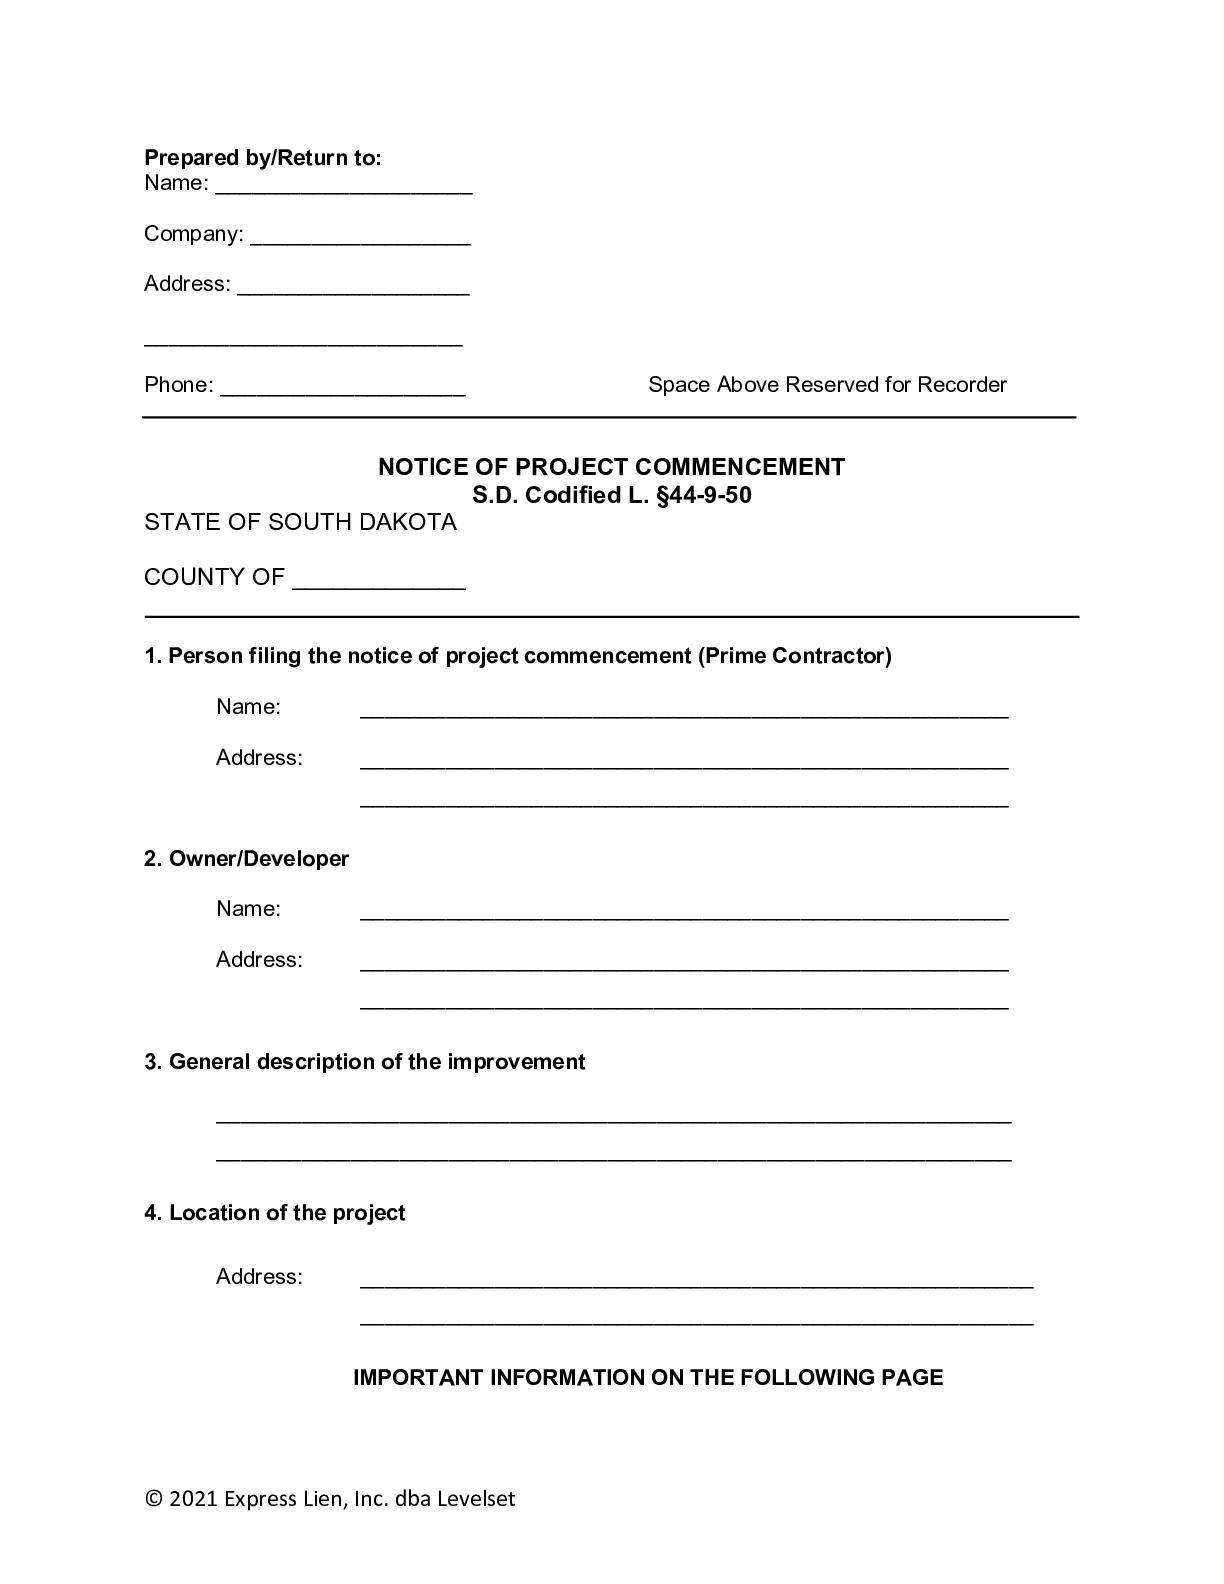 South Dakota Notice of Project Commencement Form - free from